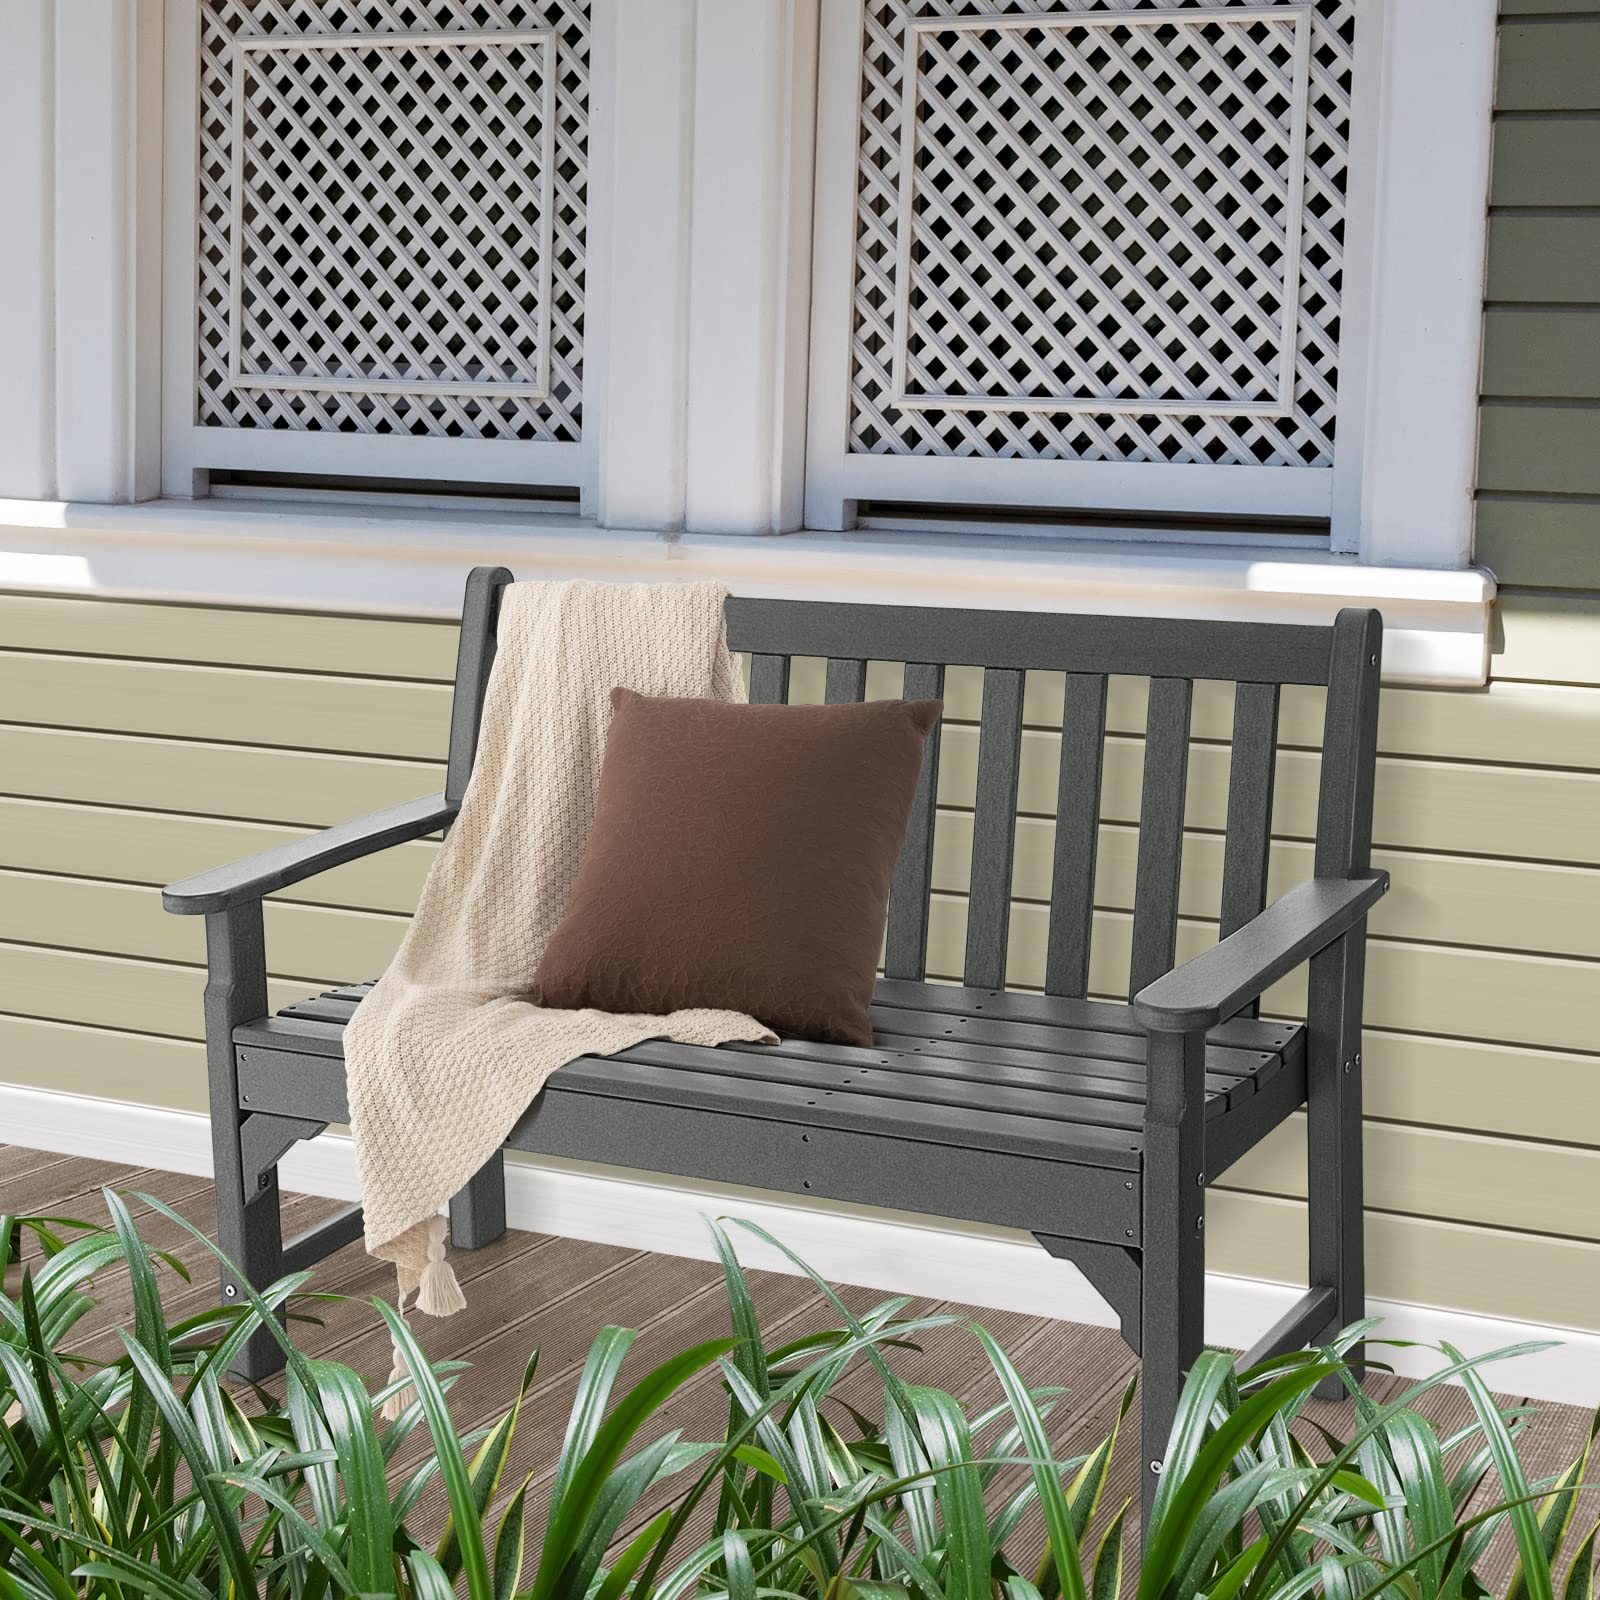 Giantex Outdoor Patio Garden Bench - All-Weather HDPE Patio Bench with Backrest